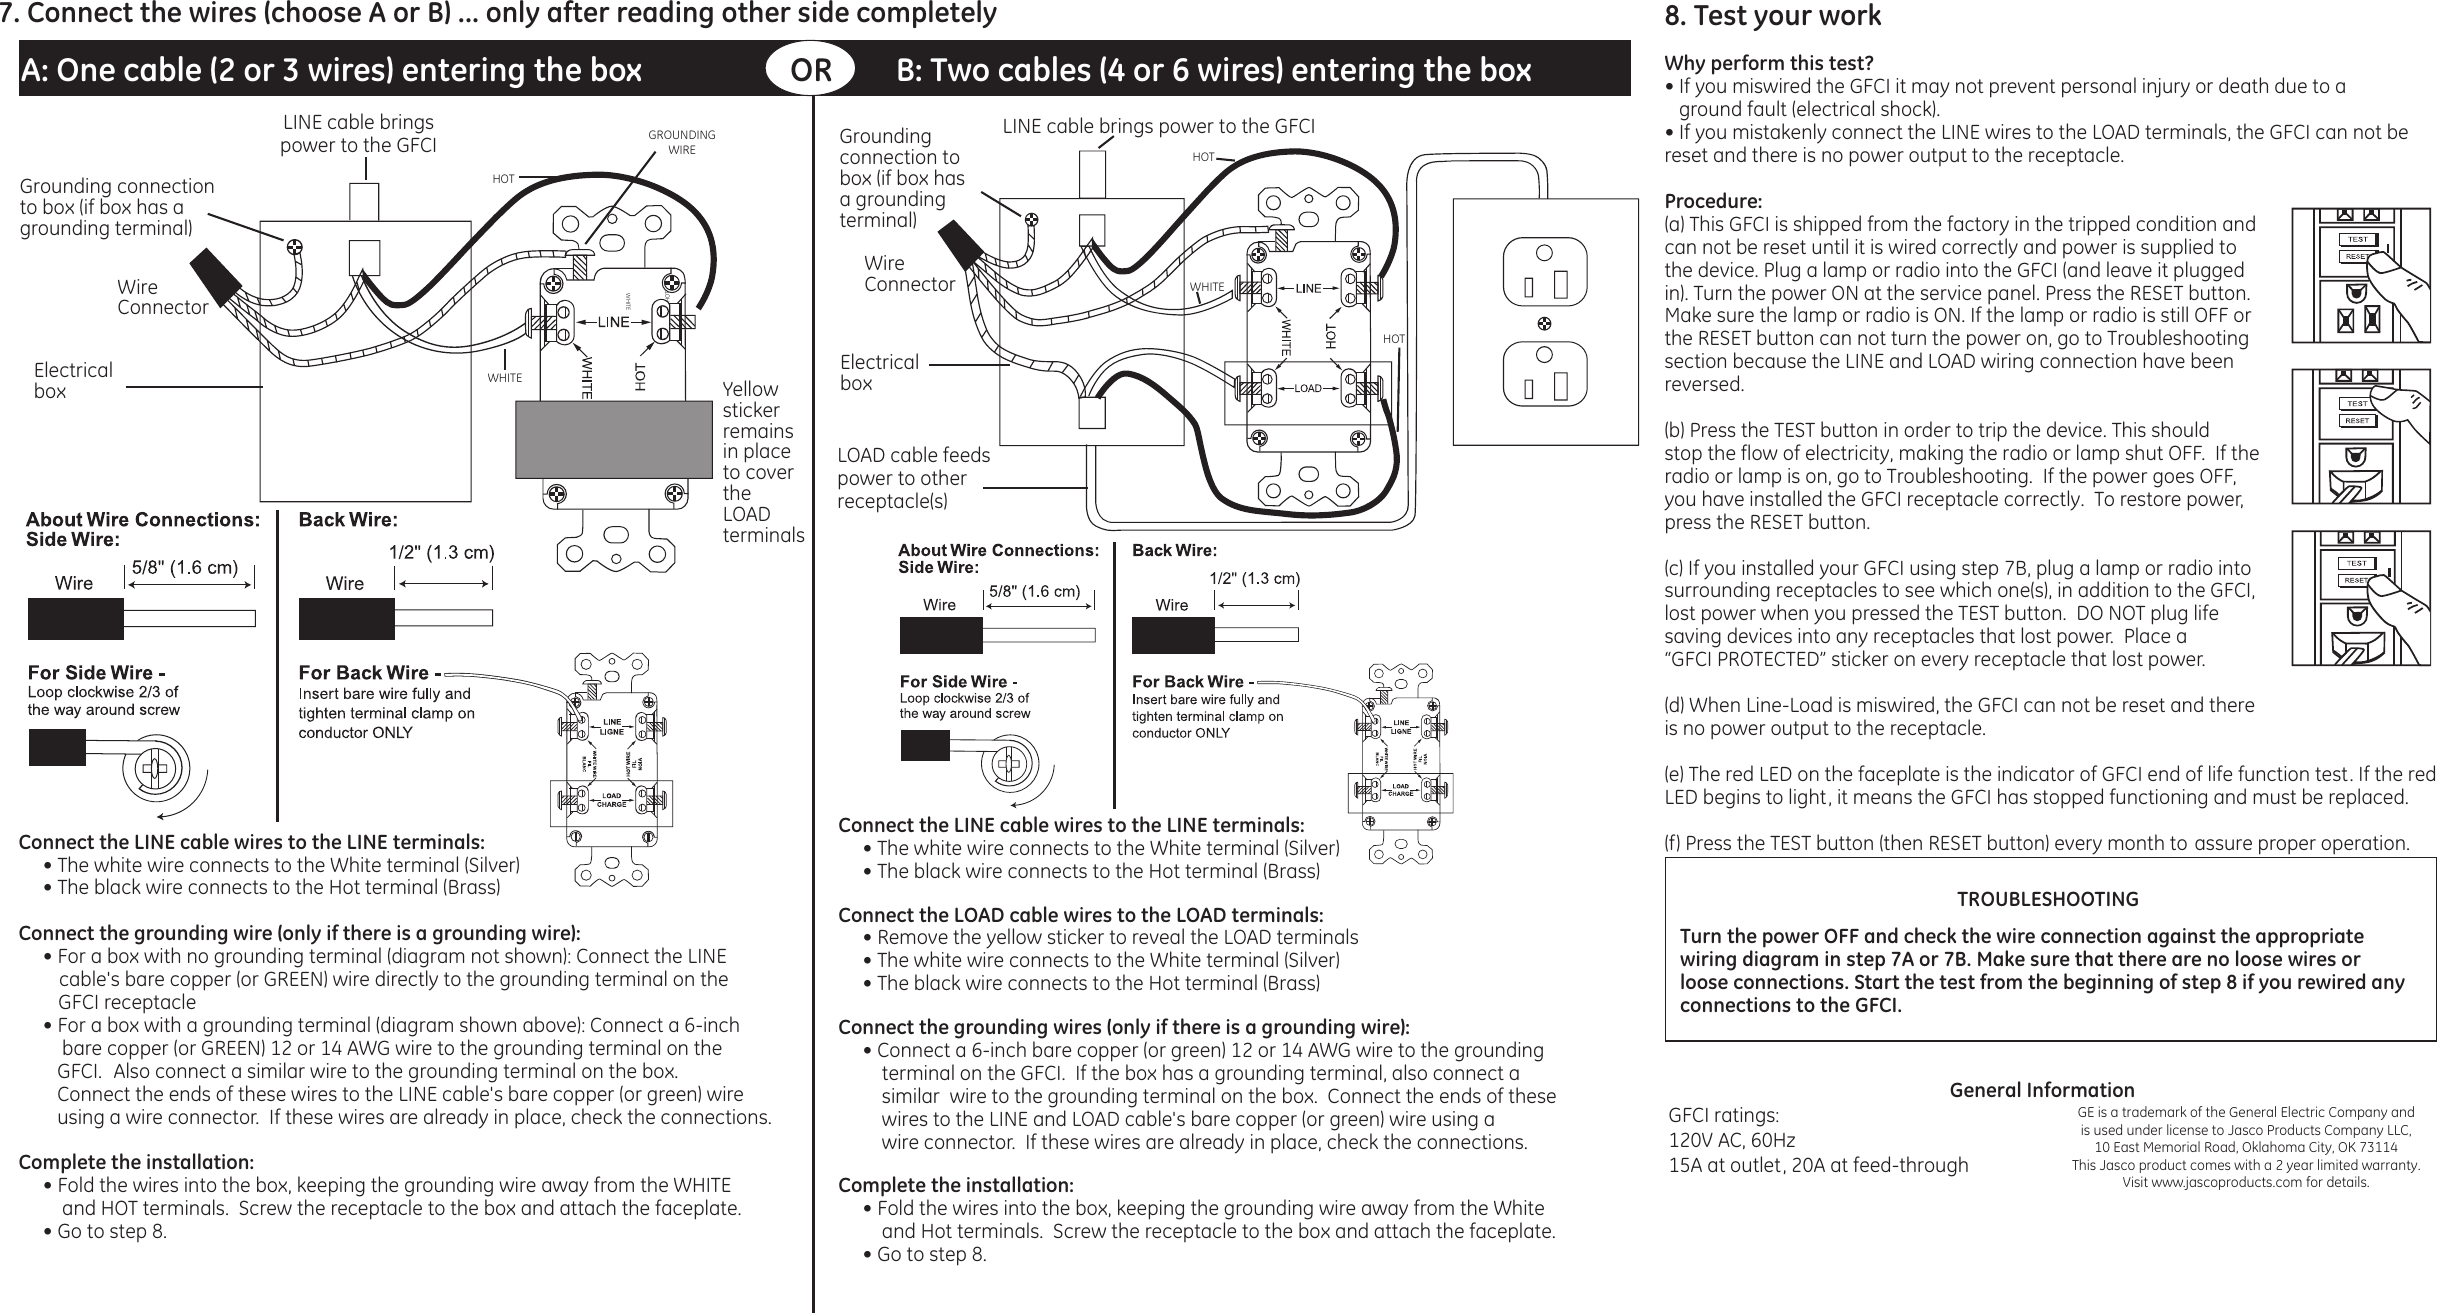 Page 2 of 2 - Ge-Appliances Ge-51960-Ge-Ground-Fault-Circuit-Interrupter-Quick-Start-Guide